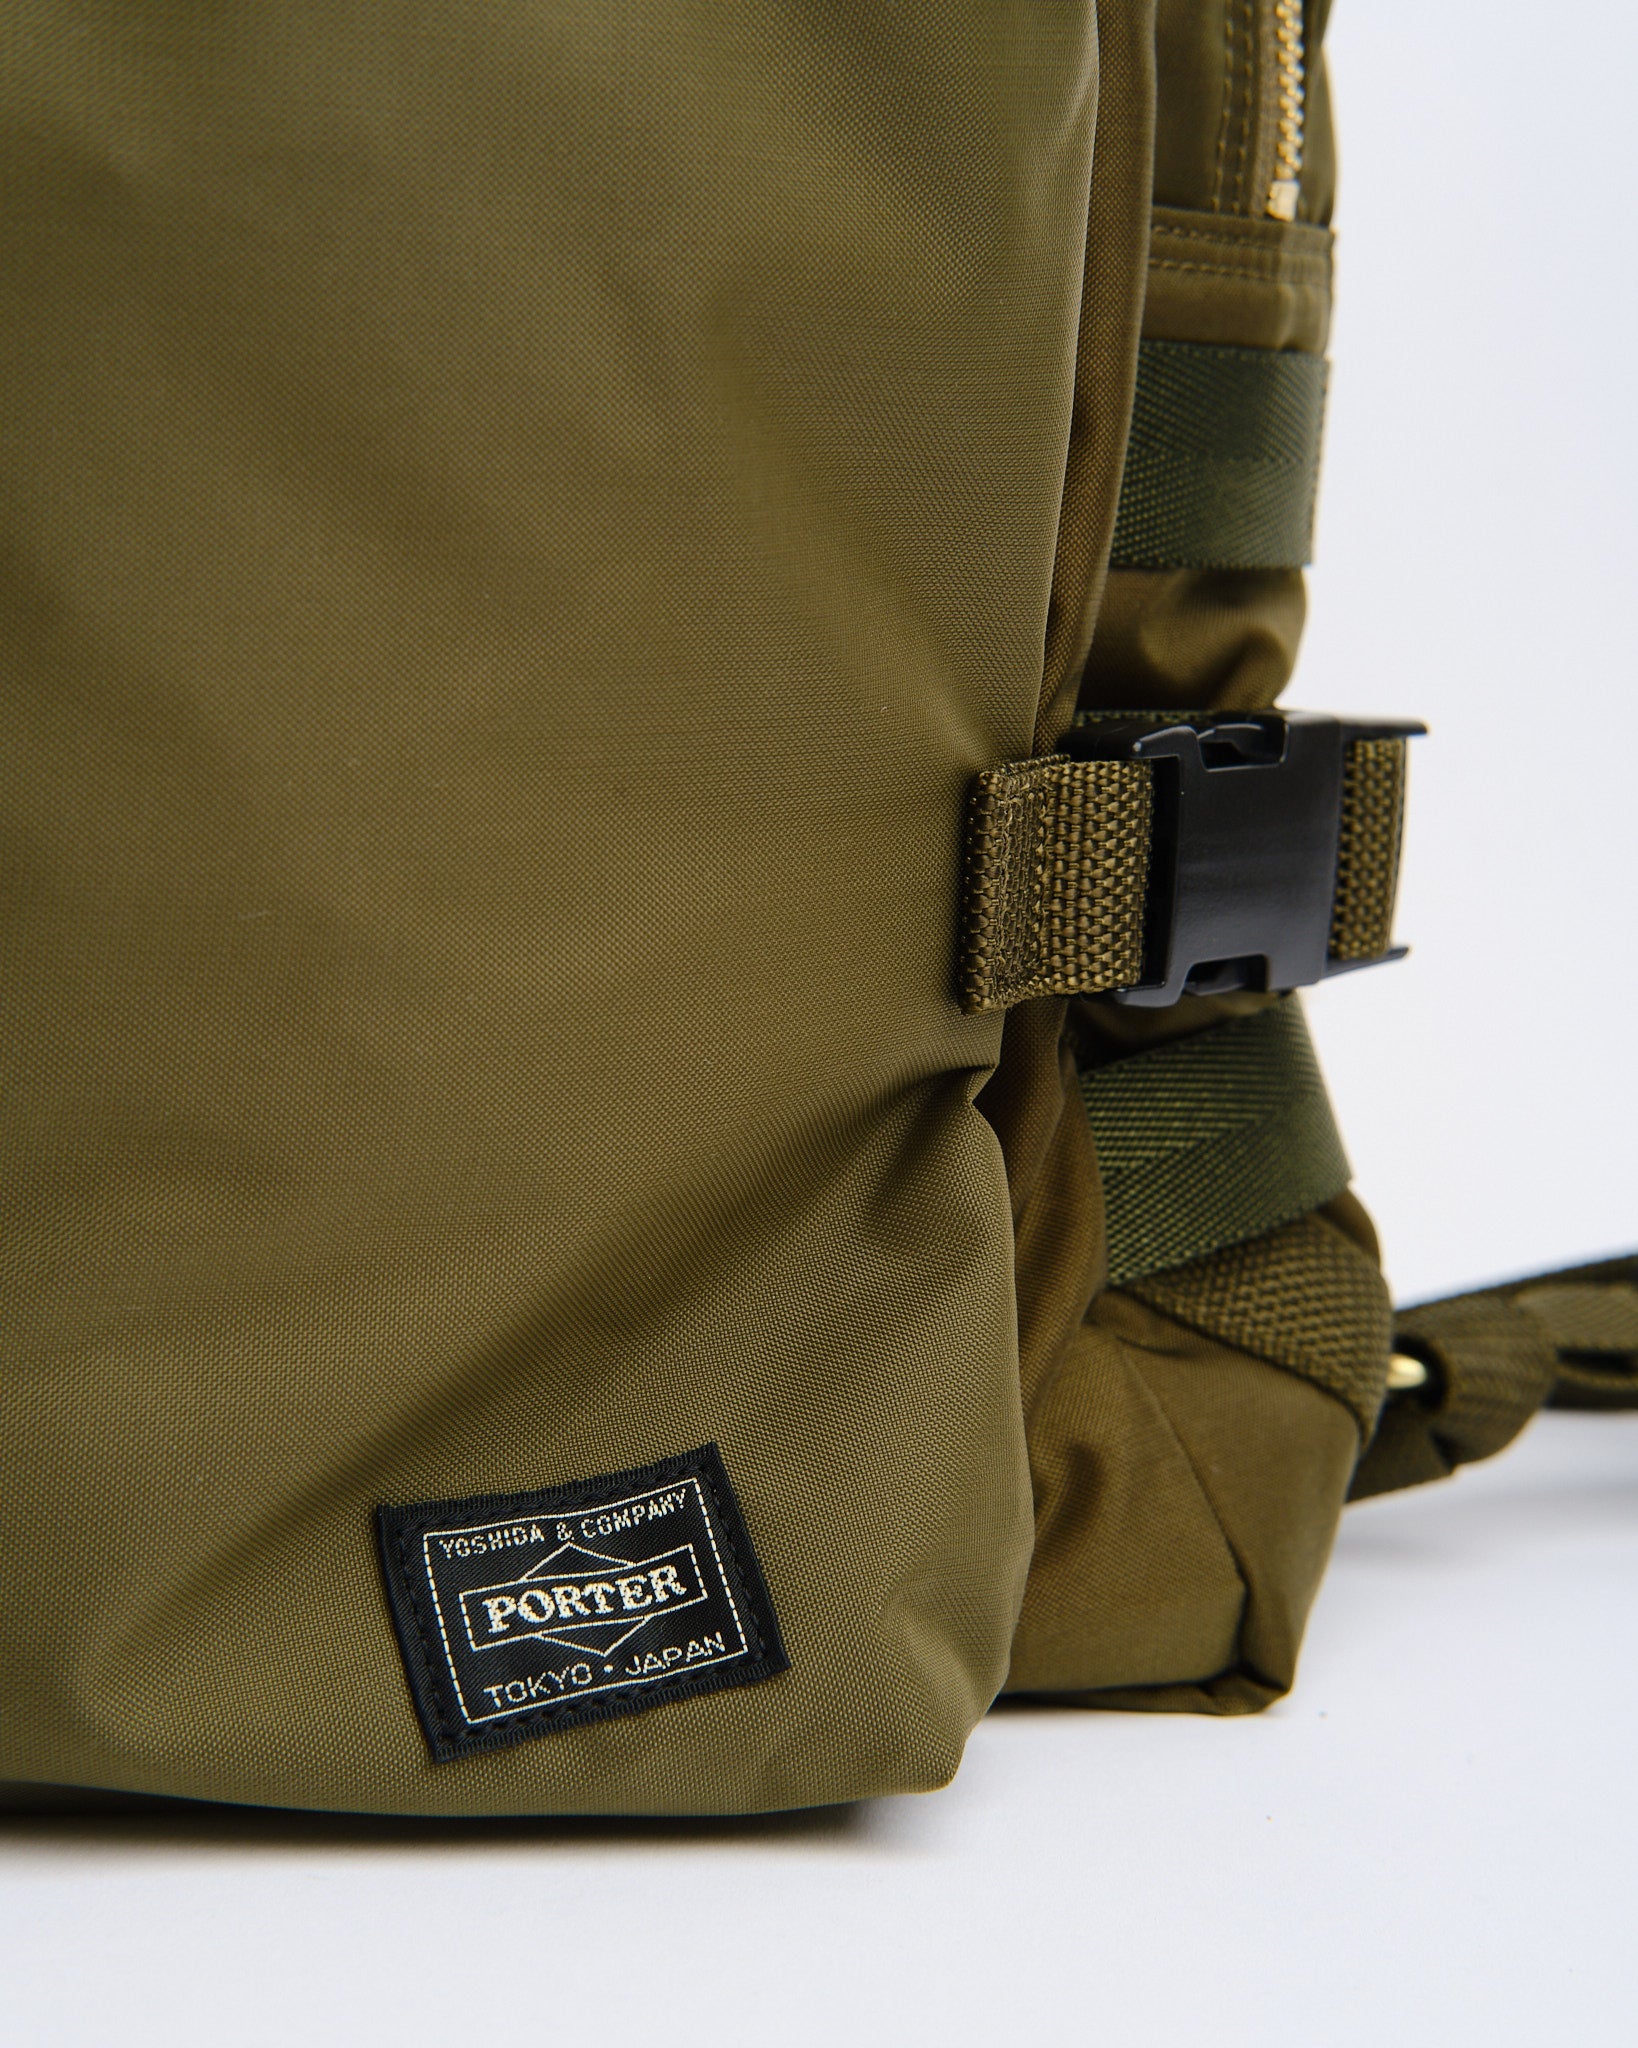 Force Daypack Olive Drab - Meadow